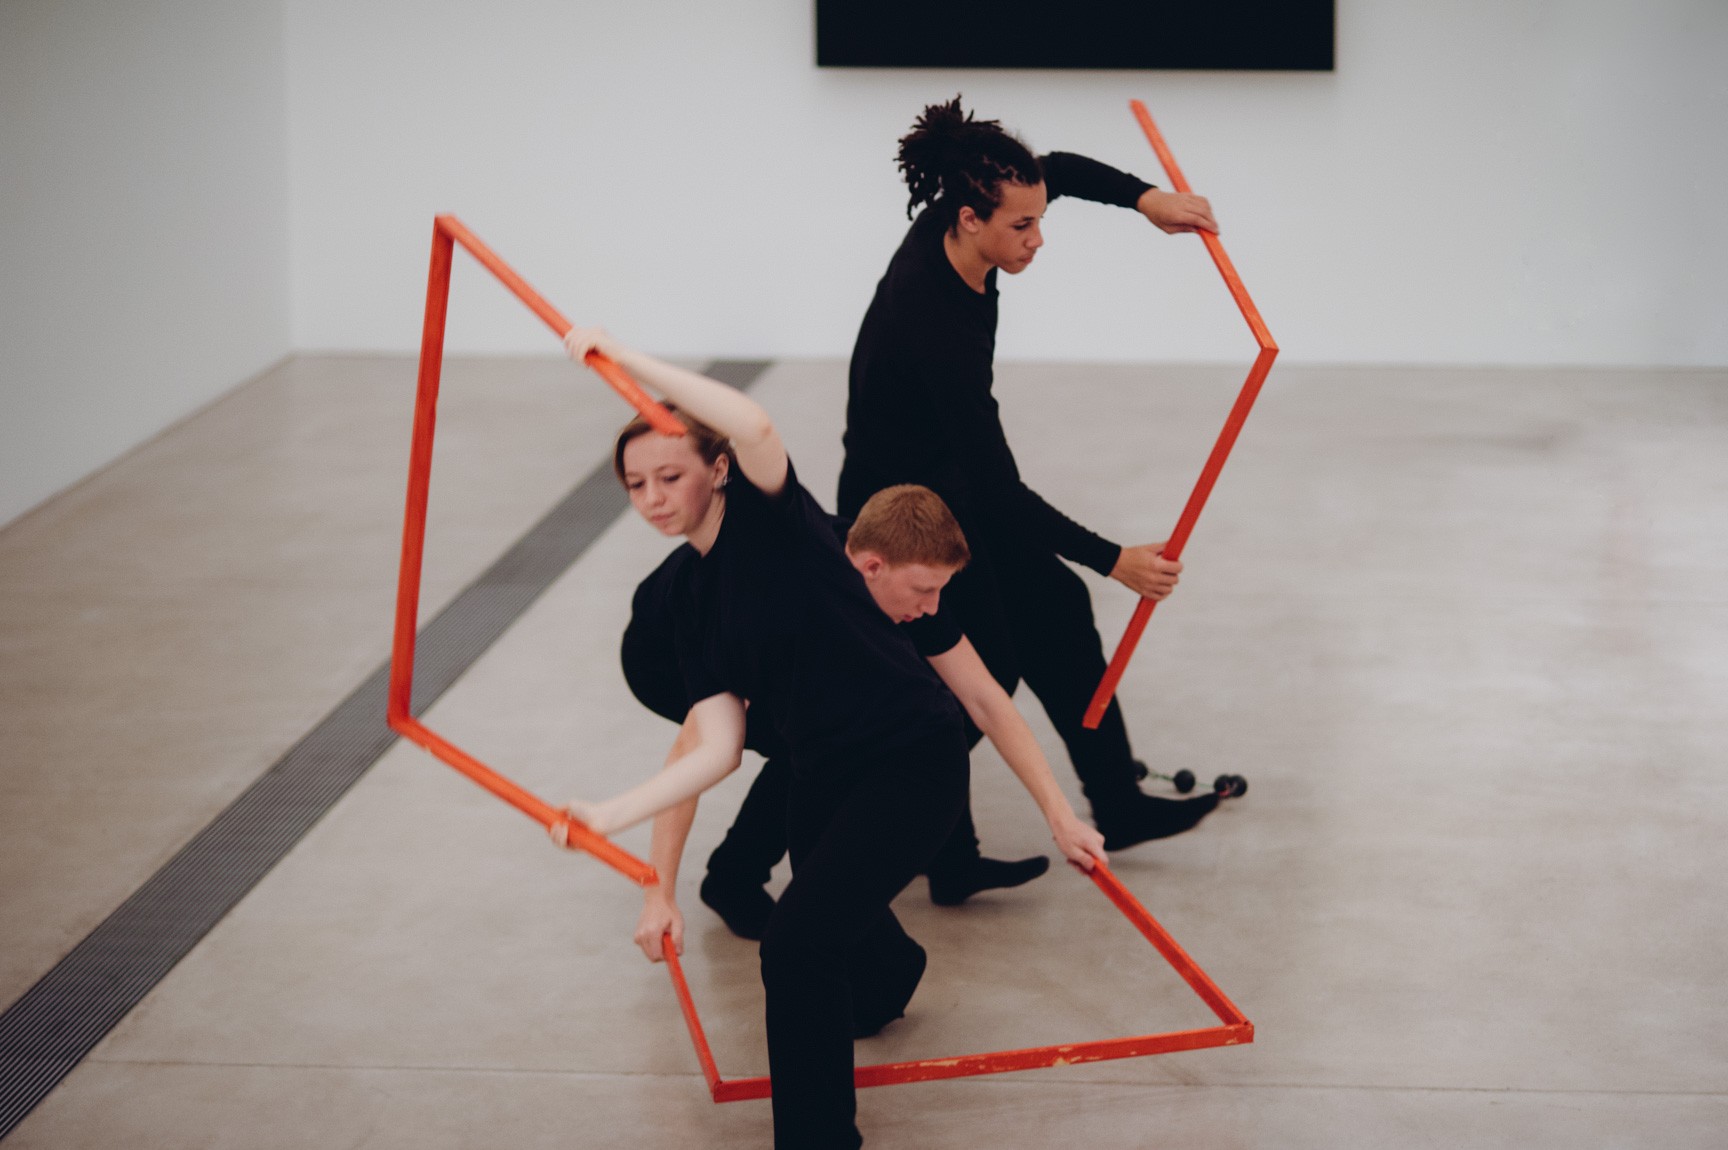 Three students perform in front of Kelly's "Blue Black," interweaving each other in red geometric shapes.